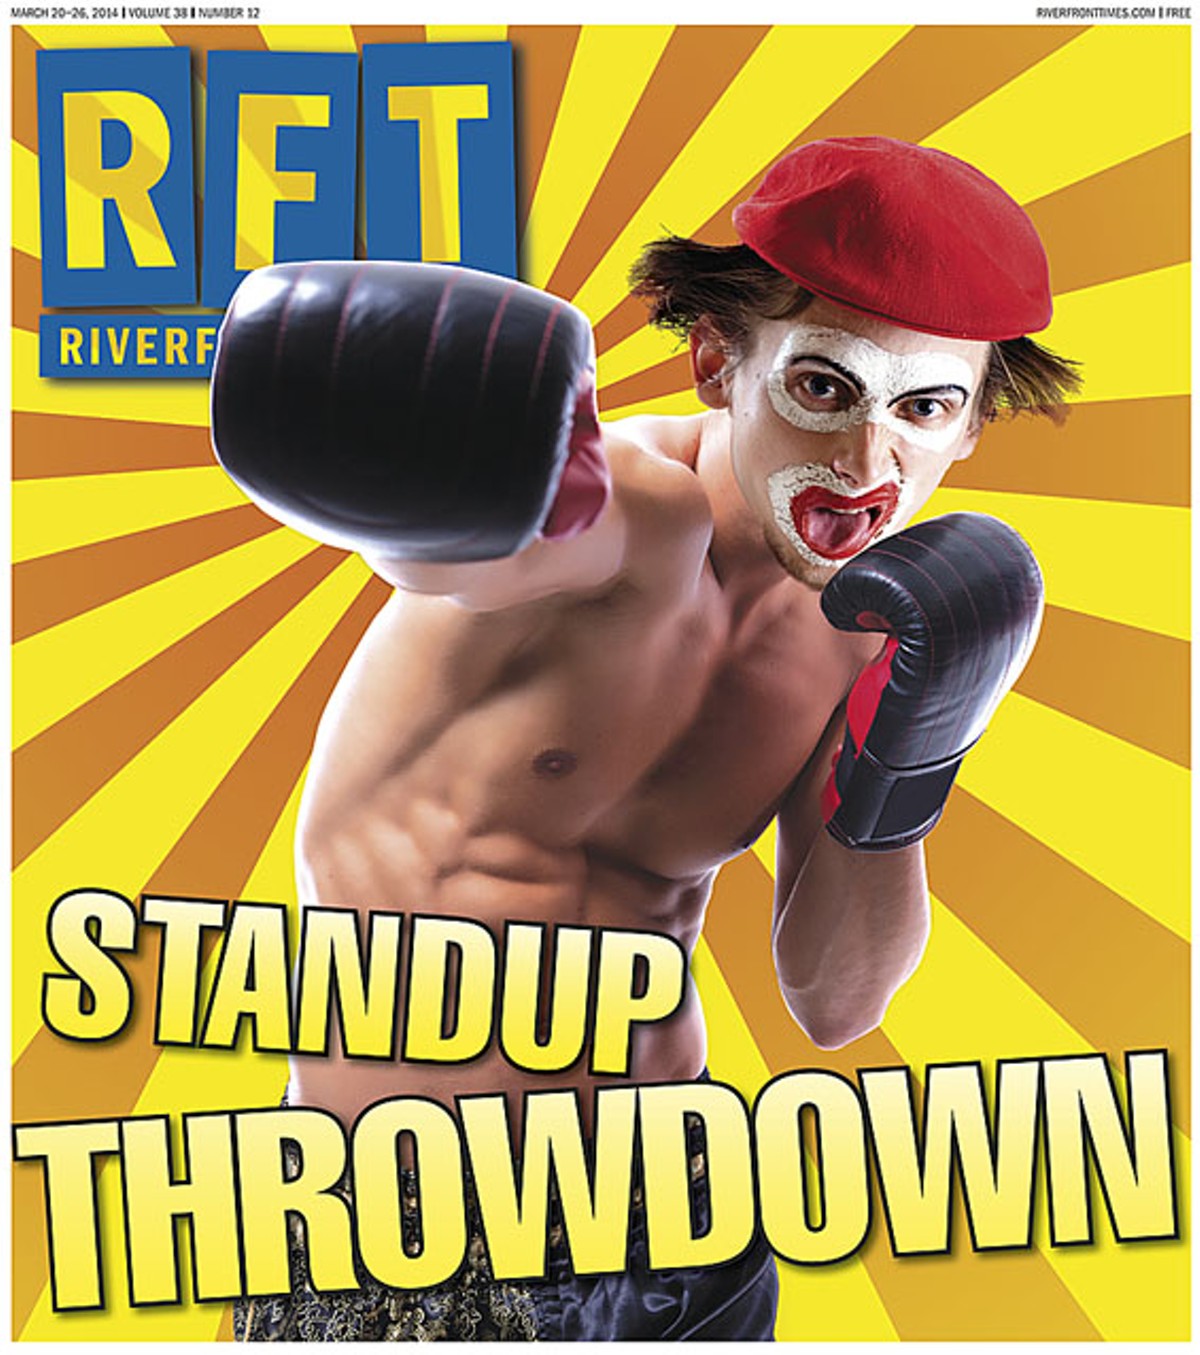 2014 Standup Throwdown: The tournament in which you determine St. Louis' funniest comedian